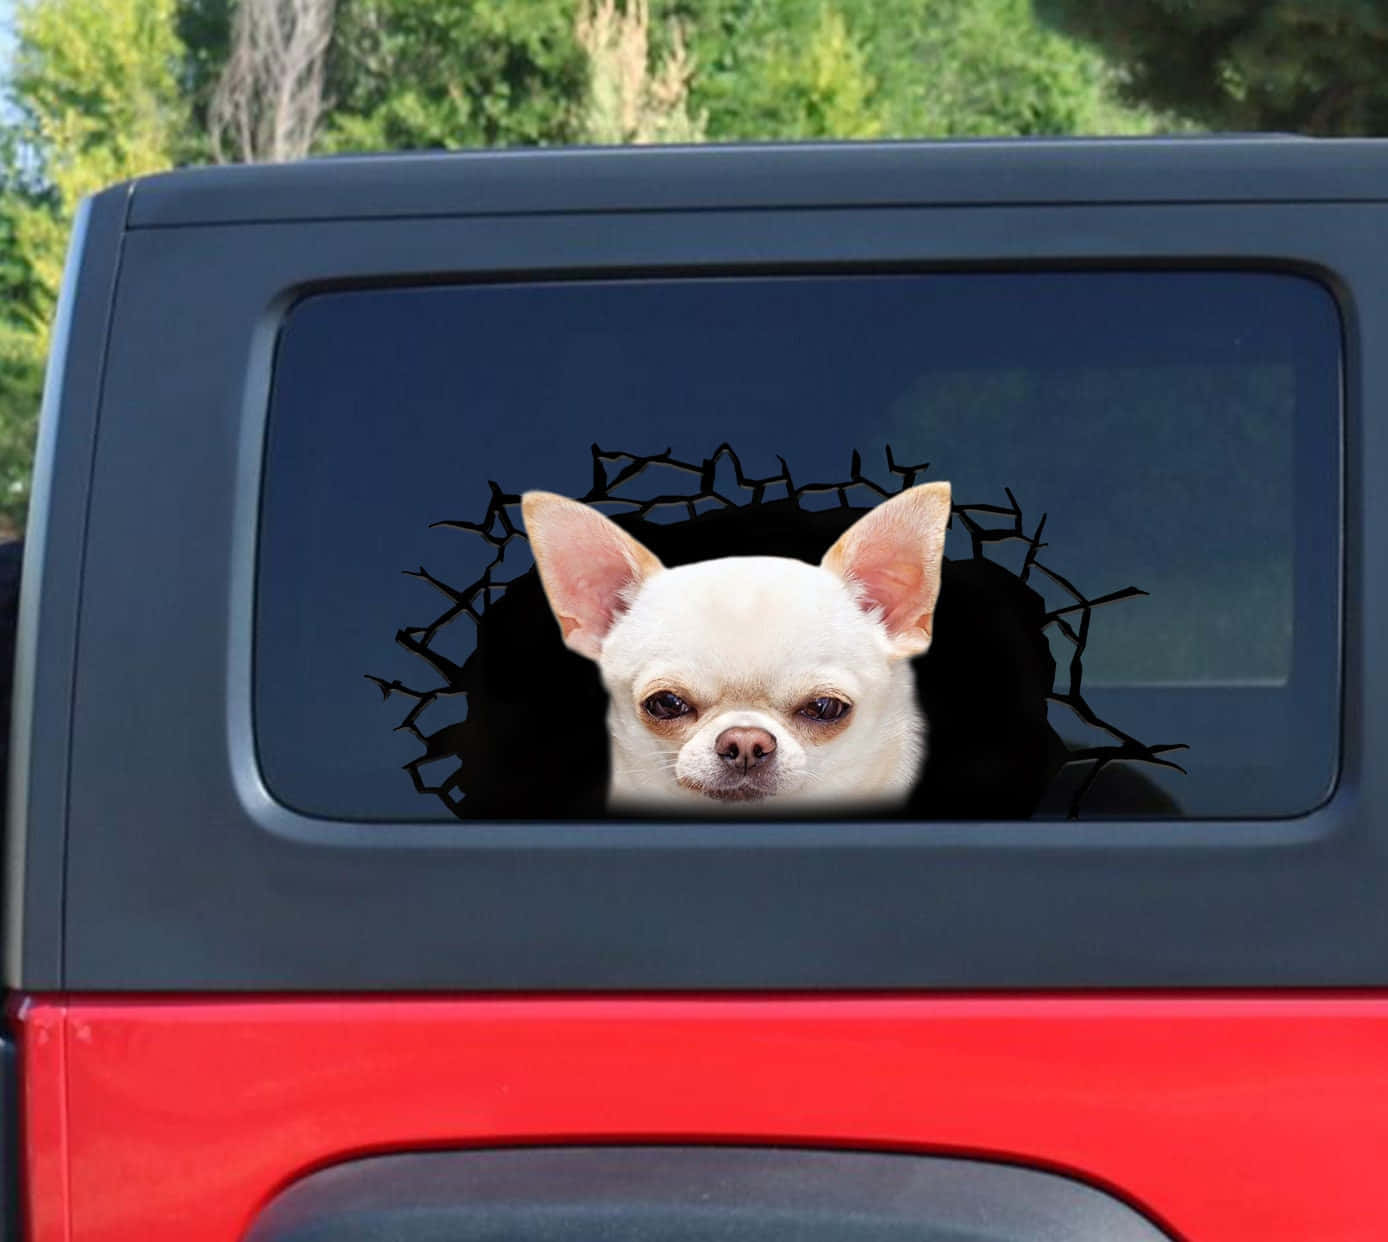 Funny Chihuahua Car Sticker Pictures